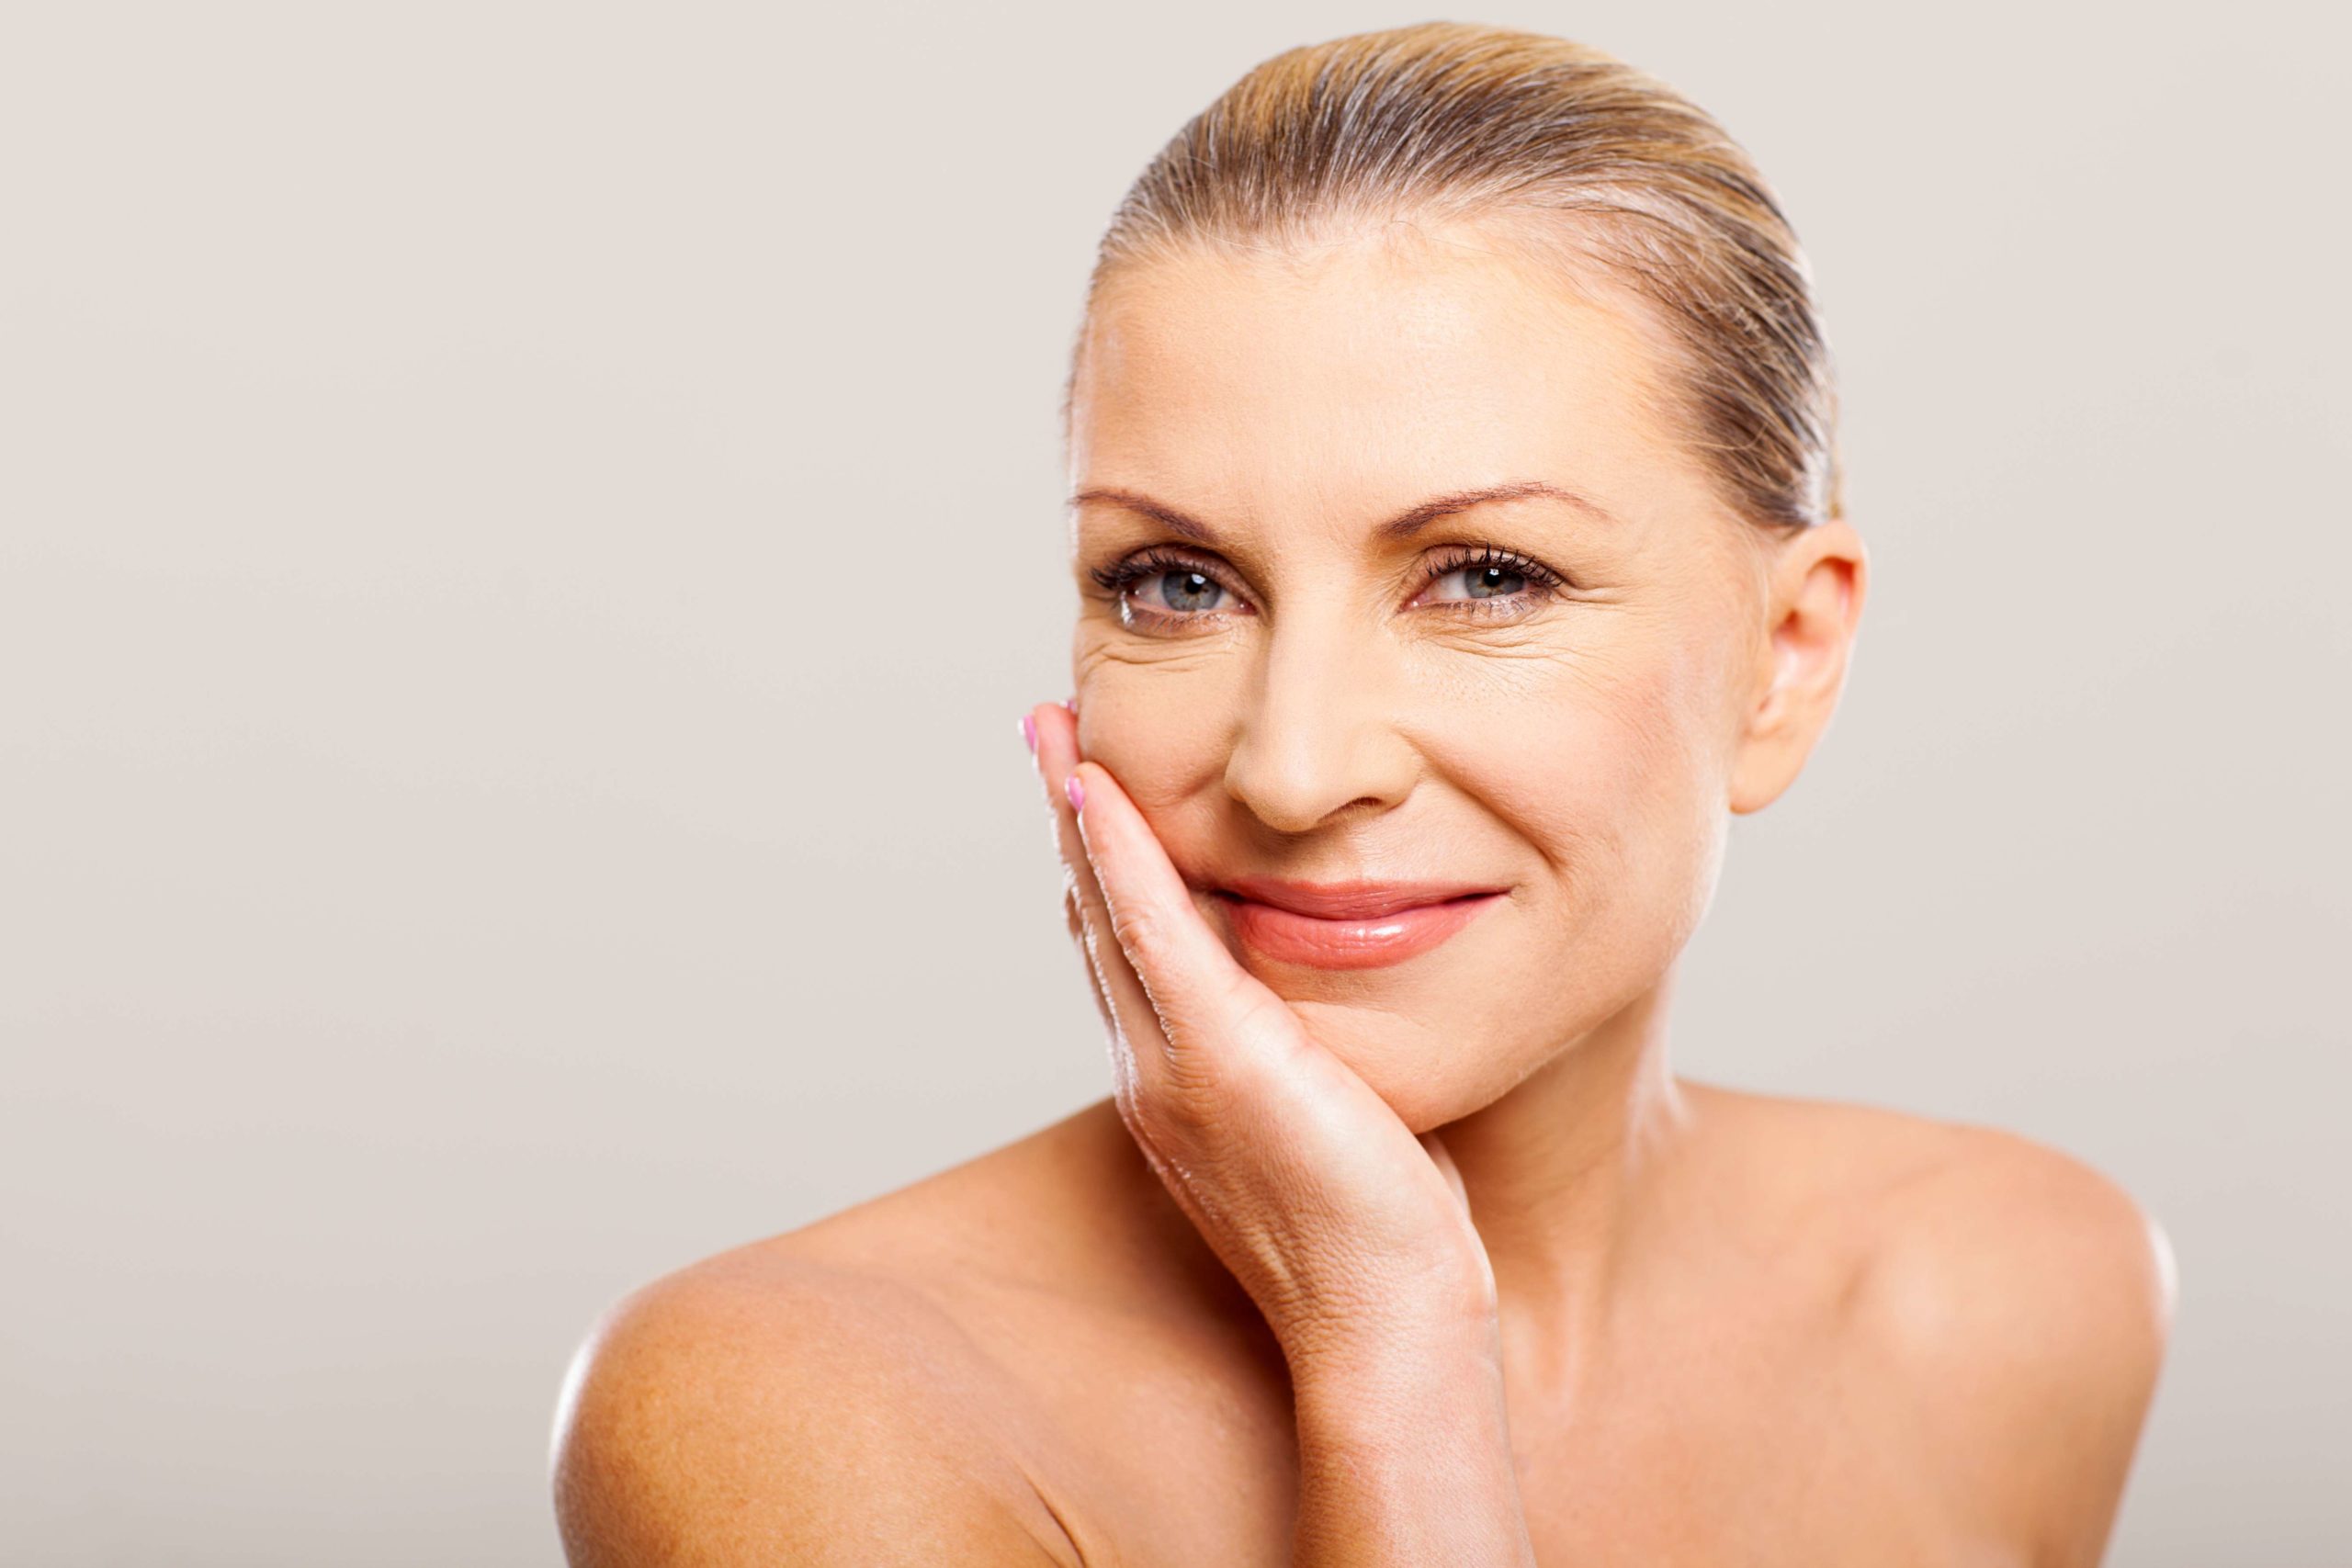 Why Choose Smith Cosmetic Surgery for a Brow Lift?